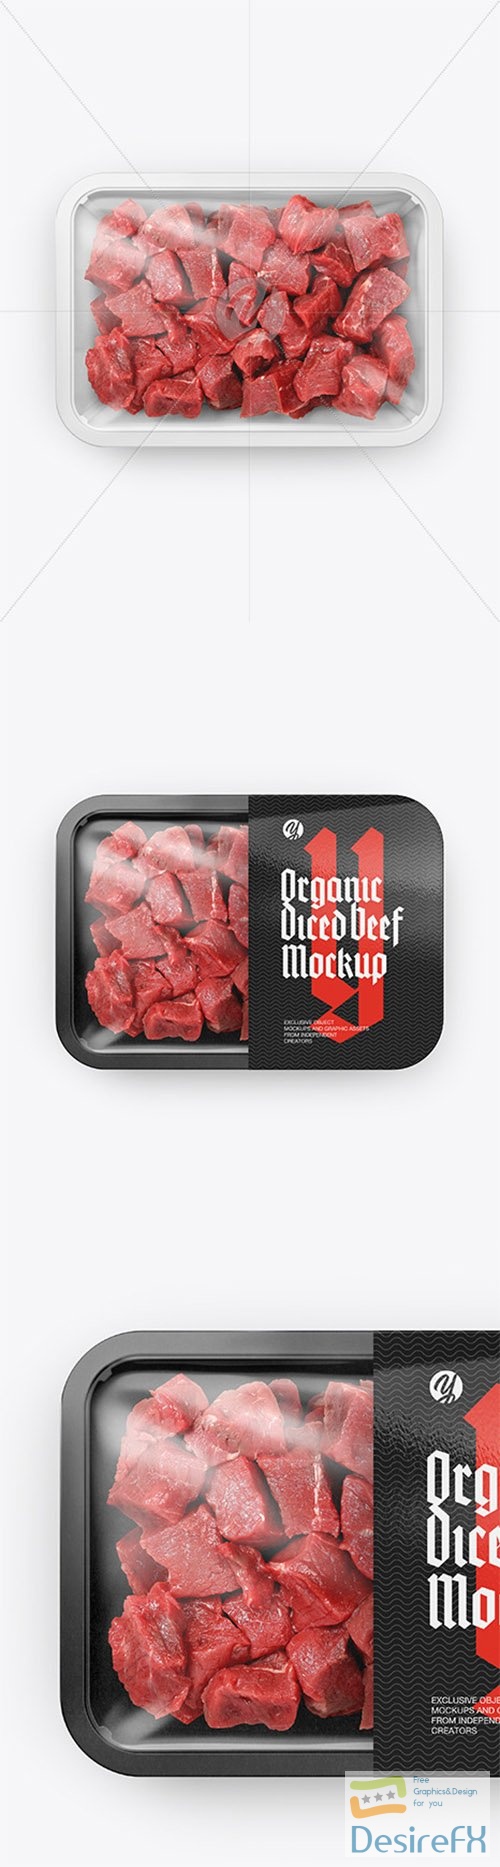 Plastic Tray With Diced Beef Mockup 83396 TIF